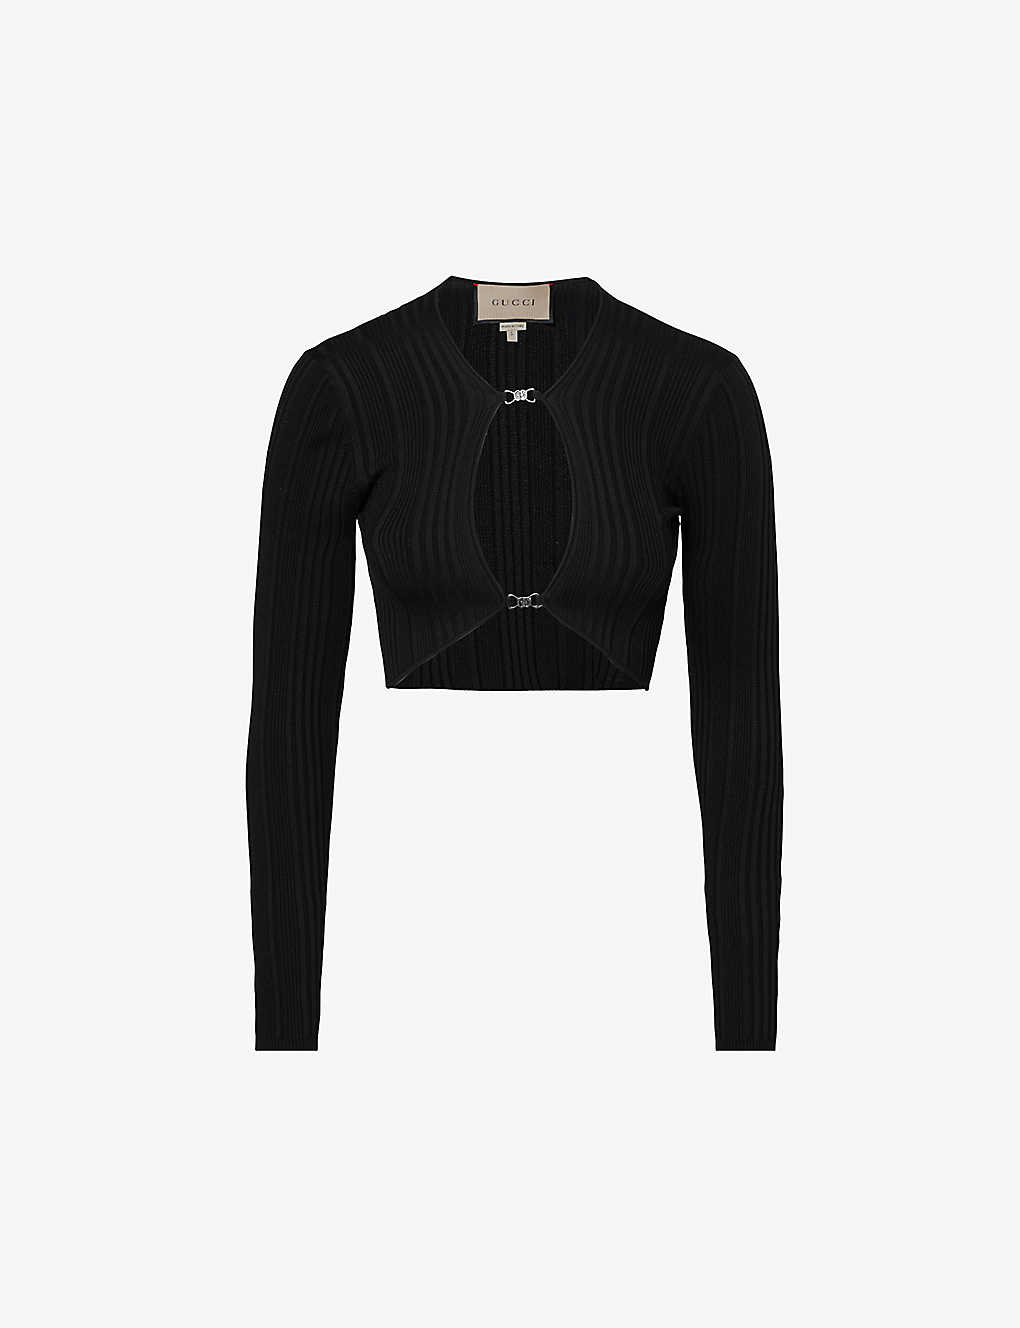 Gucci Womens Black Cut-out Cropped Knitted Top